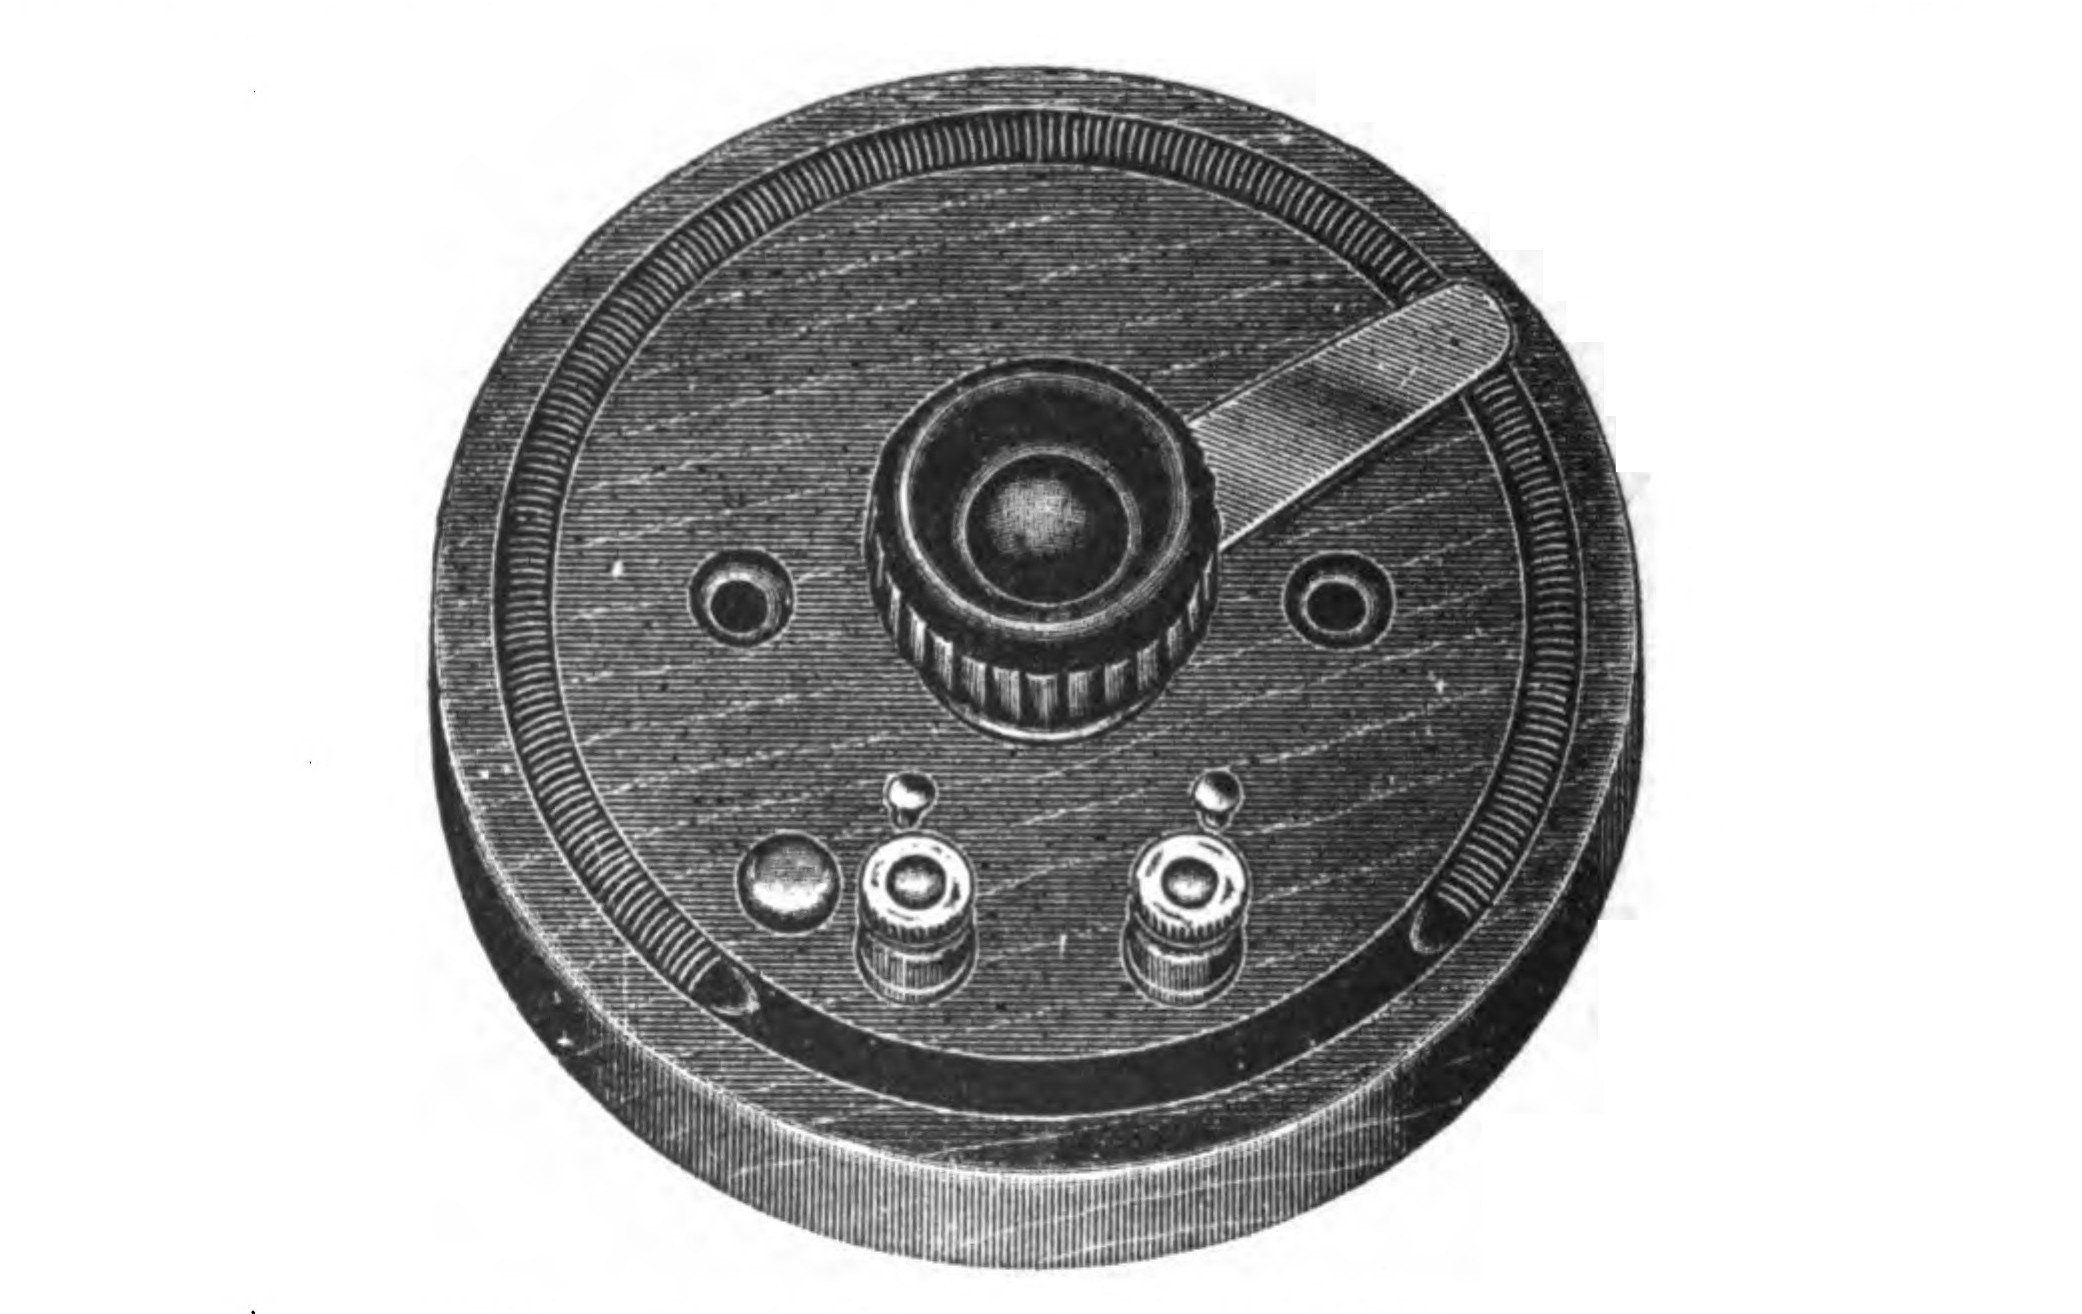 FIG. 82.—The completed Rheostat.